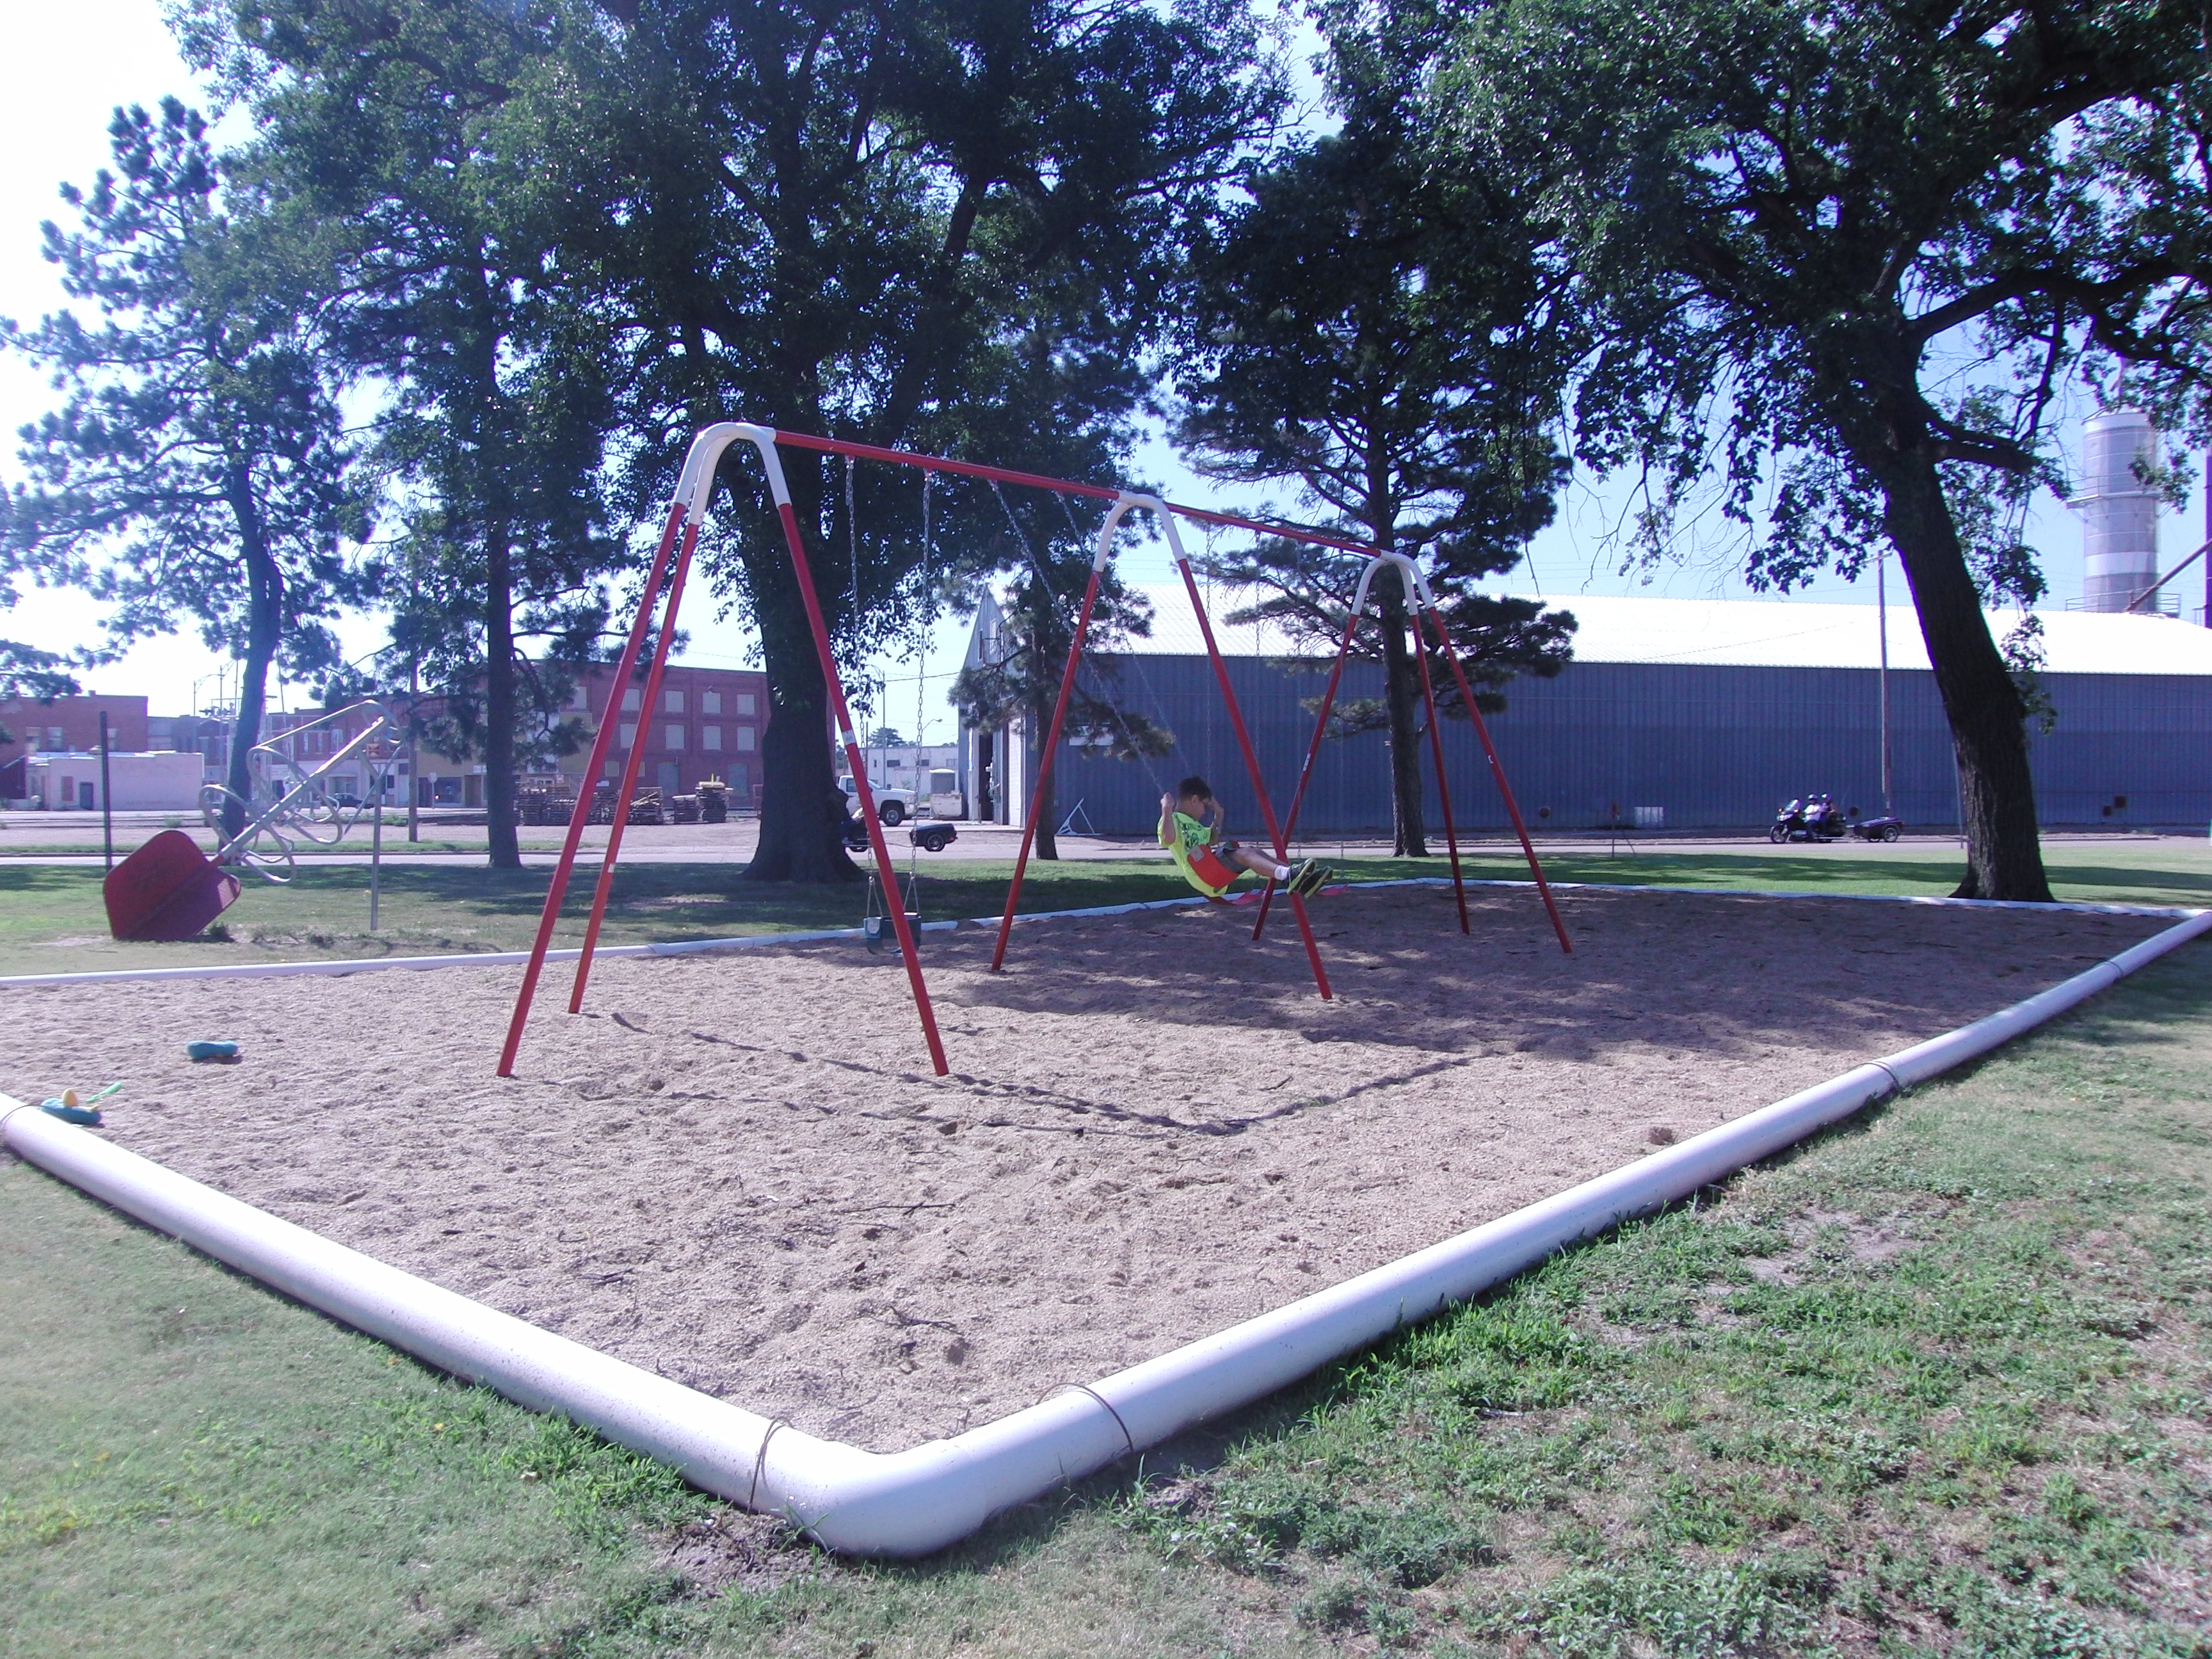 New swings at Baugher Park